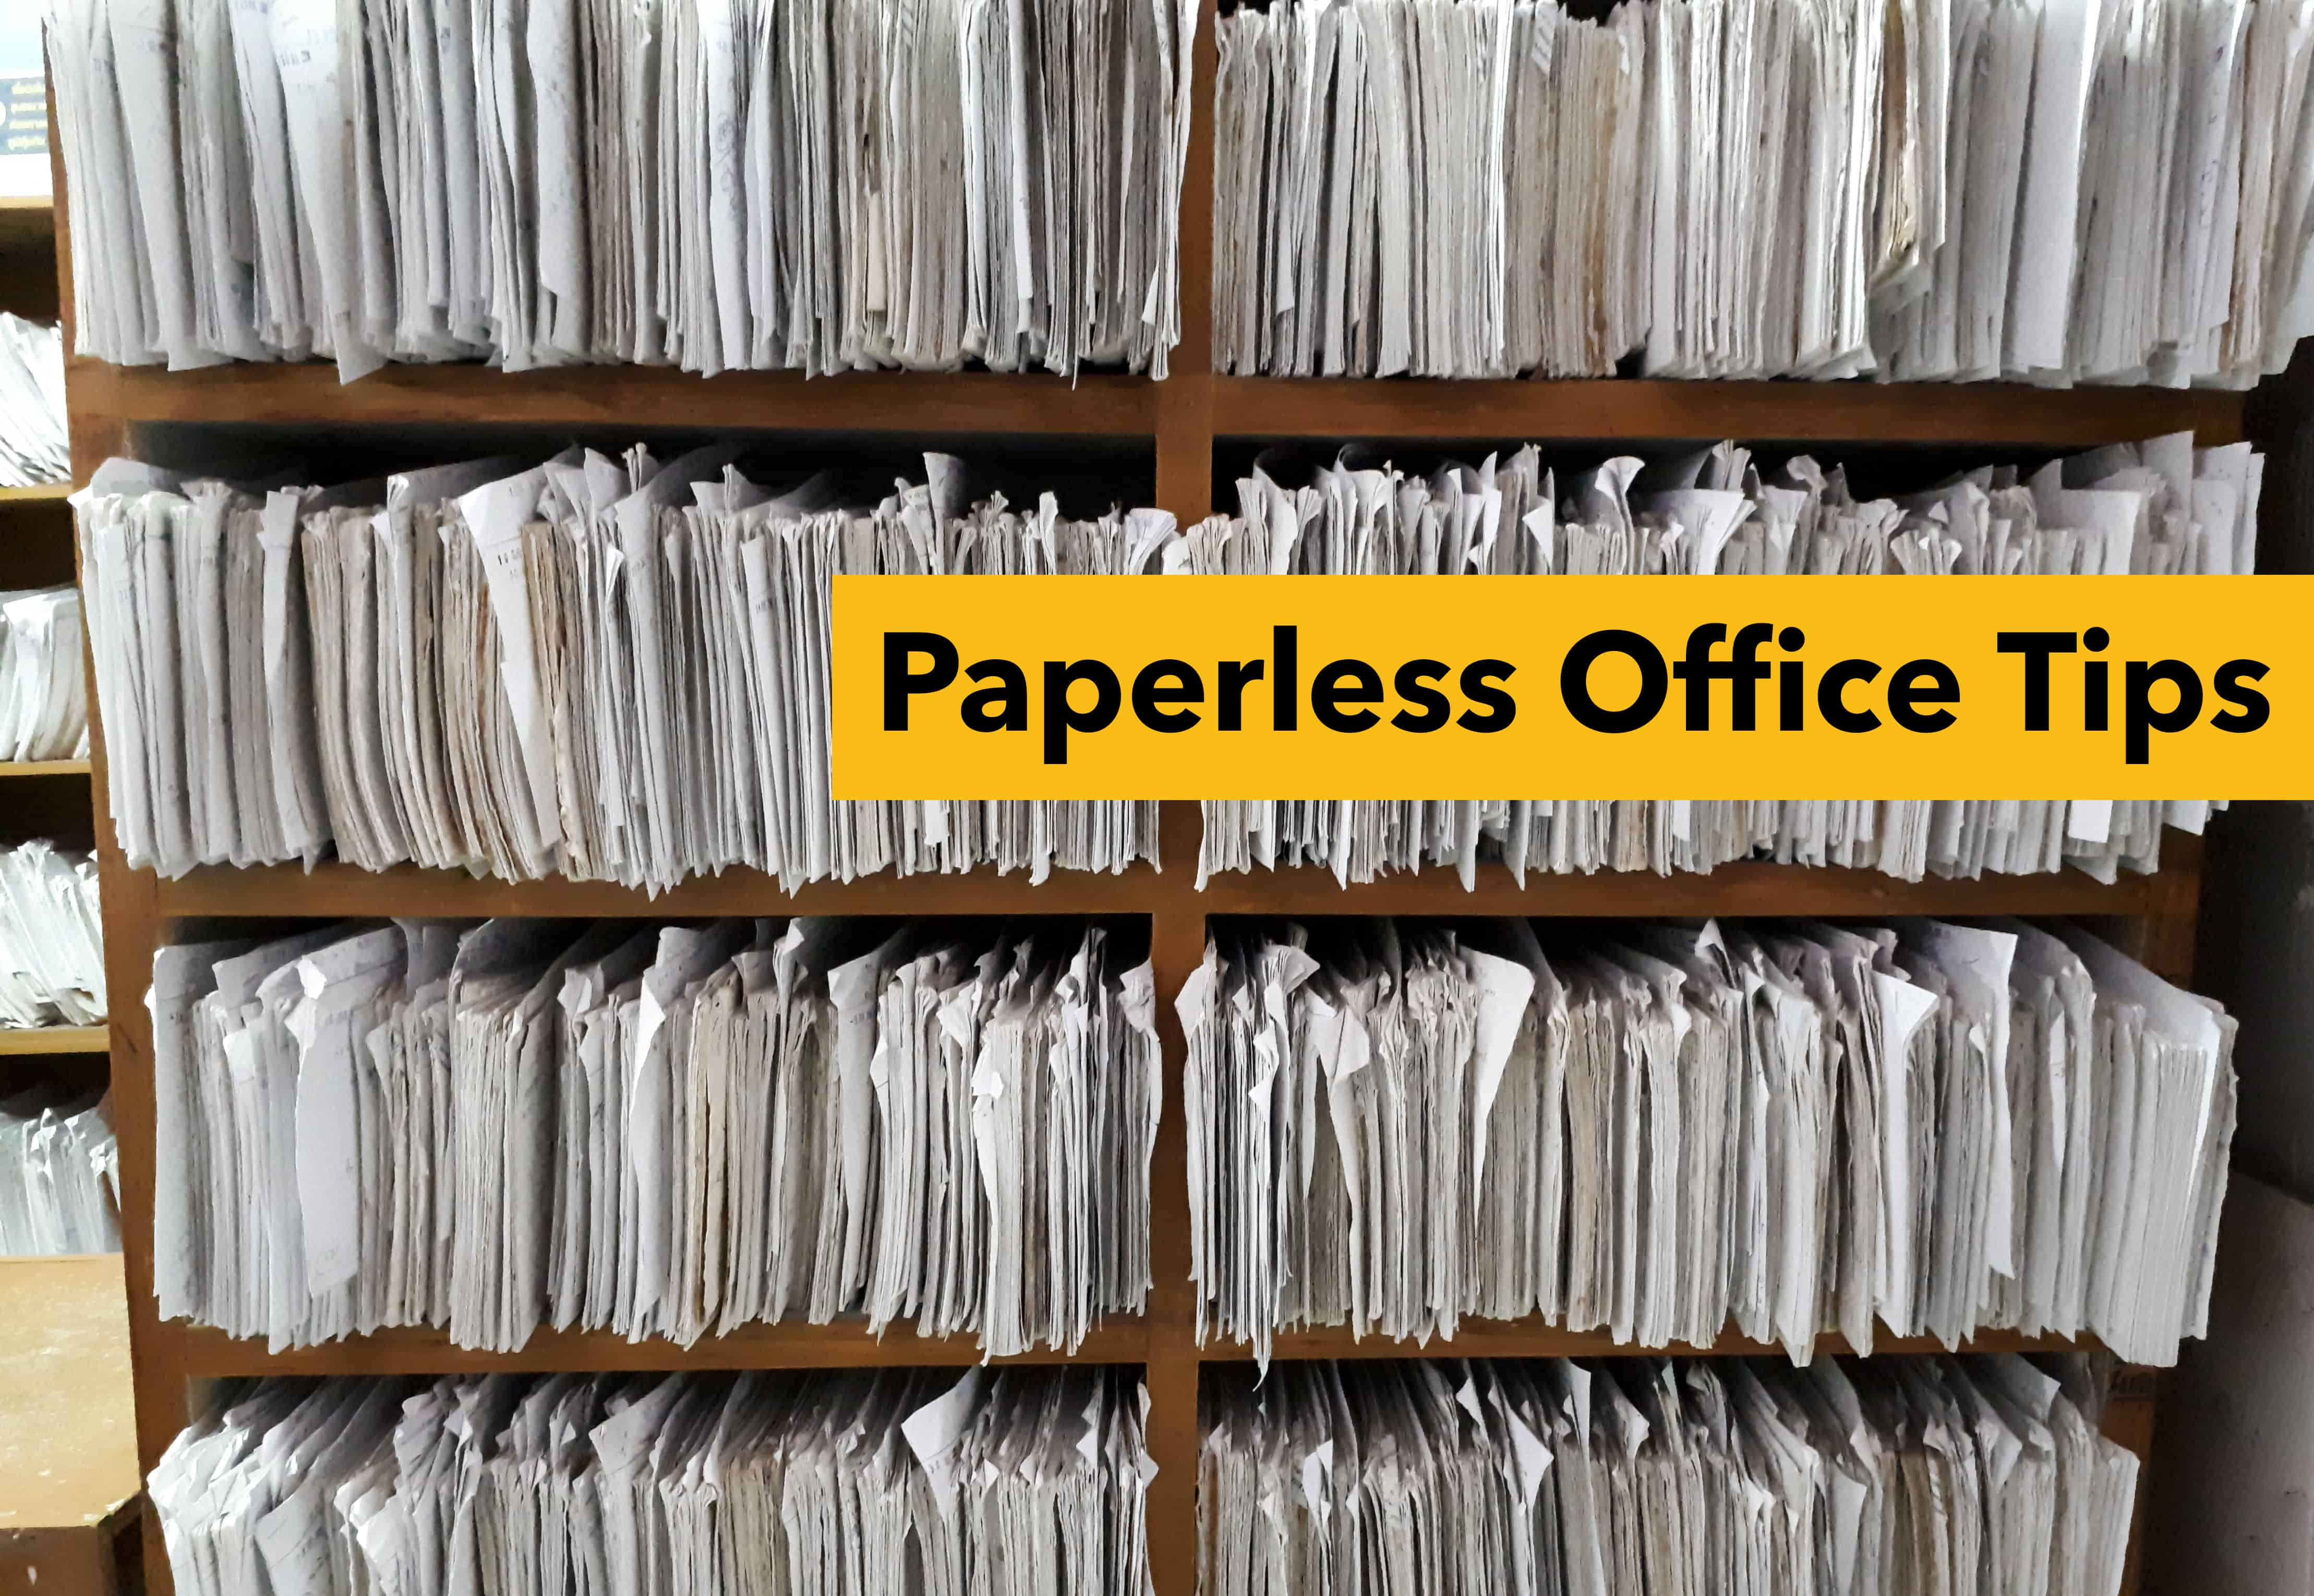 Paperless Office Tips